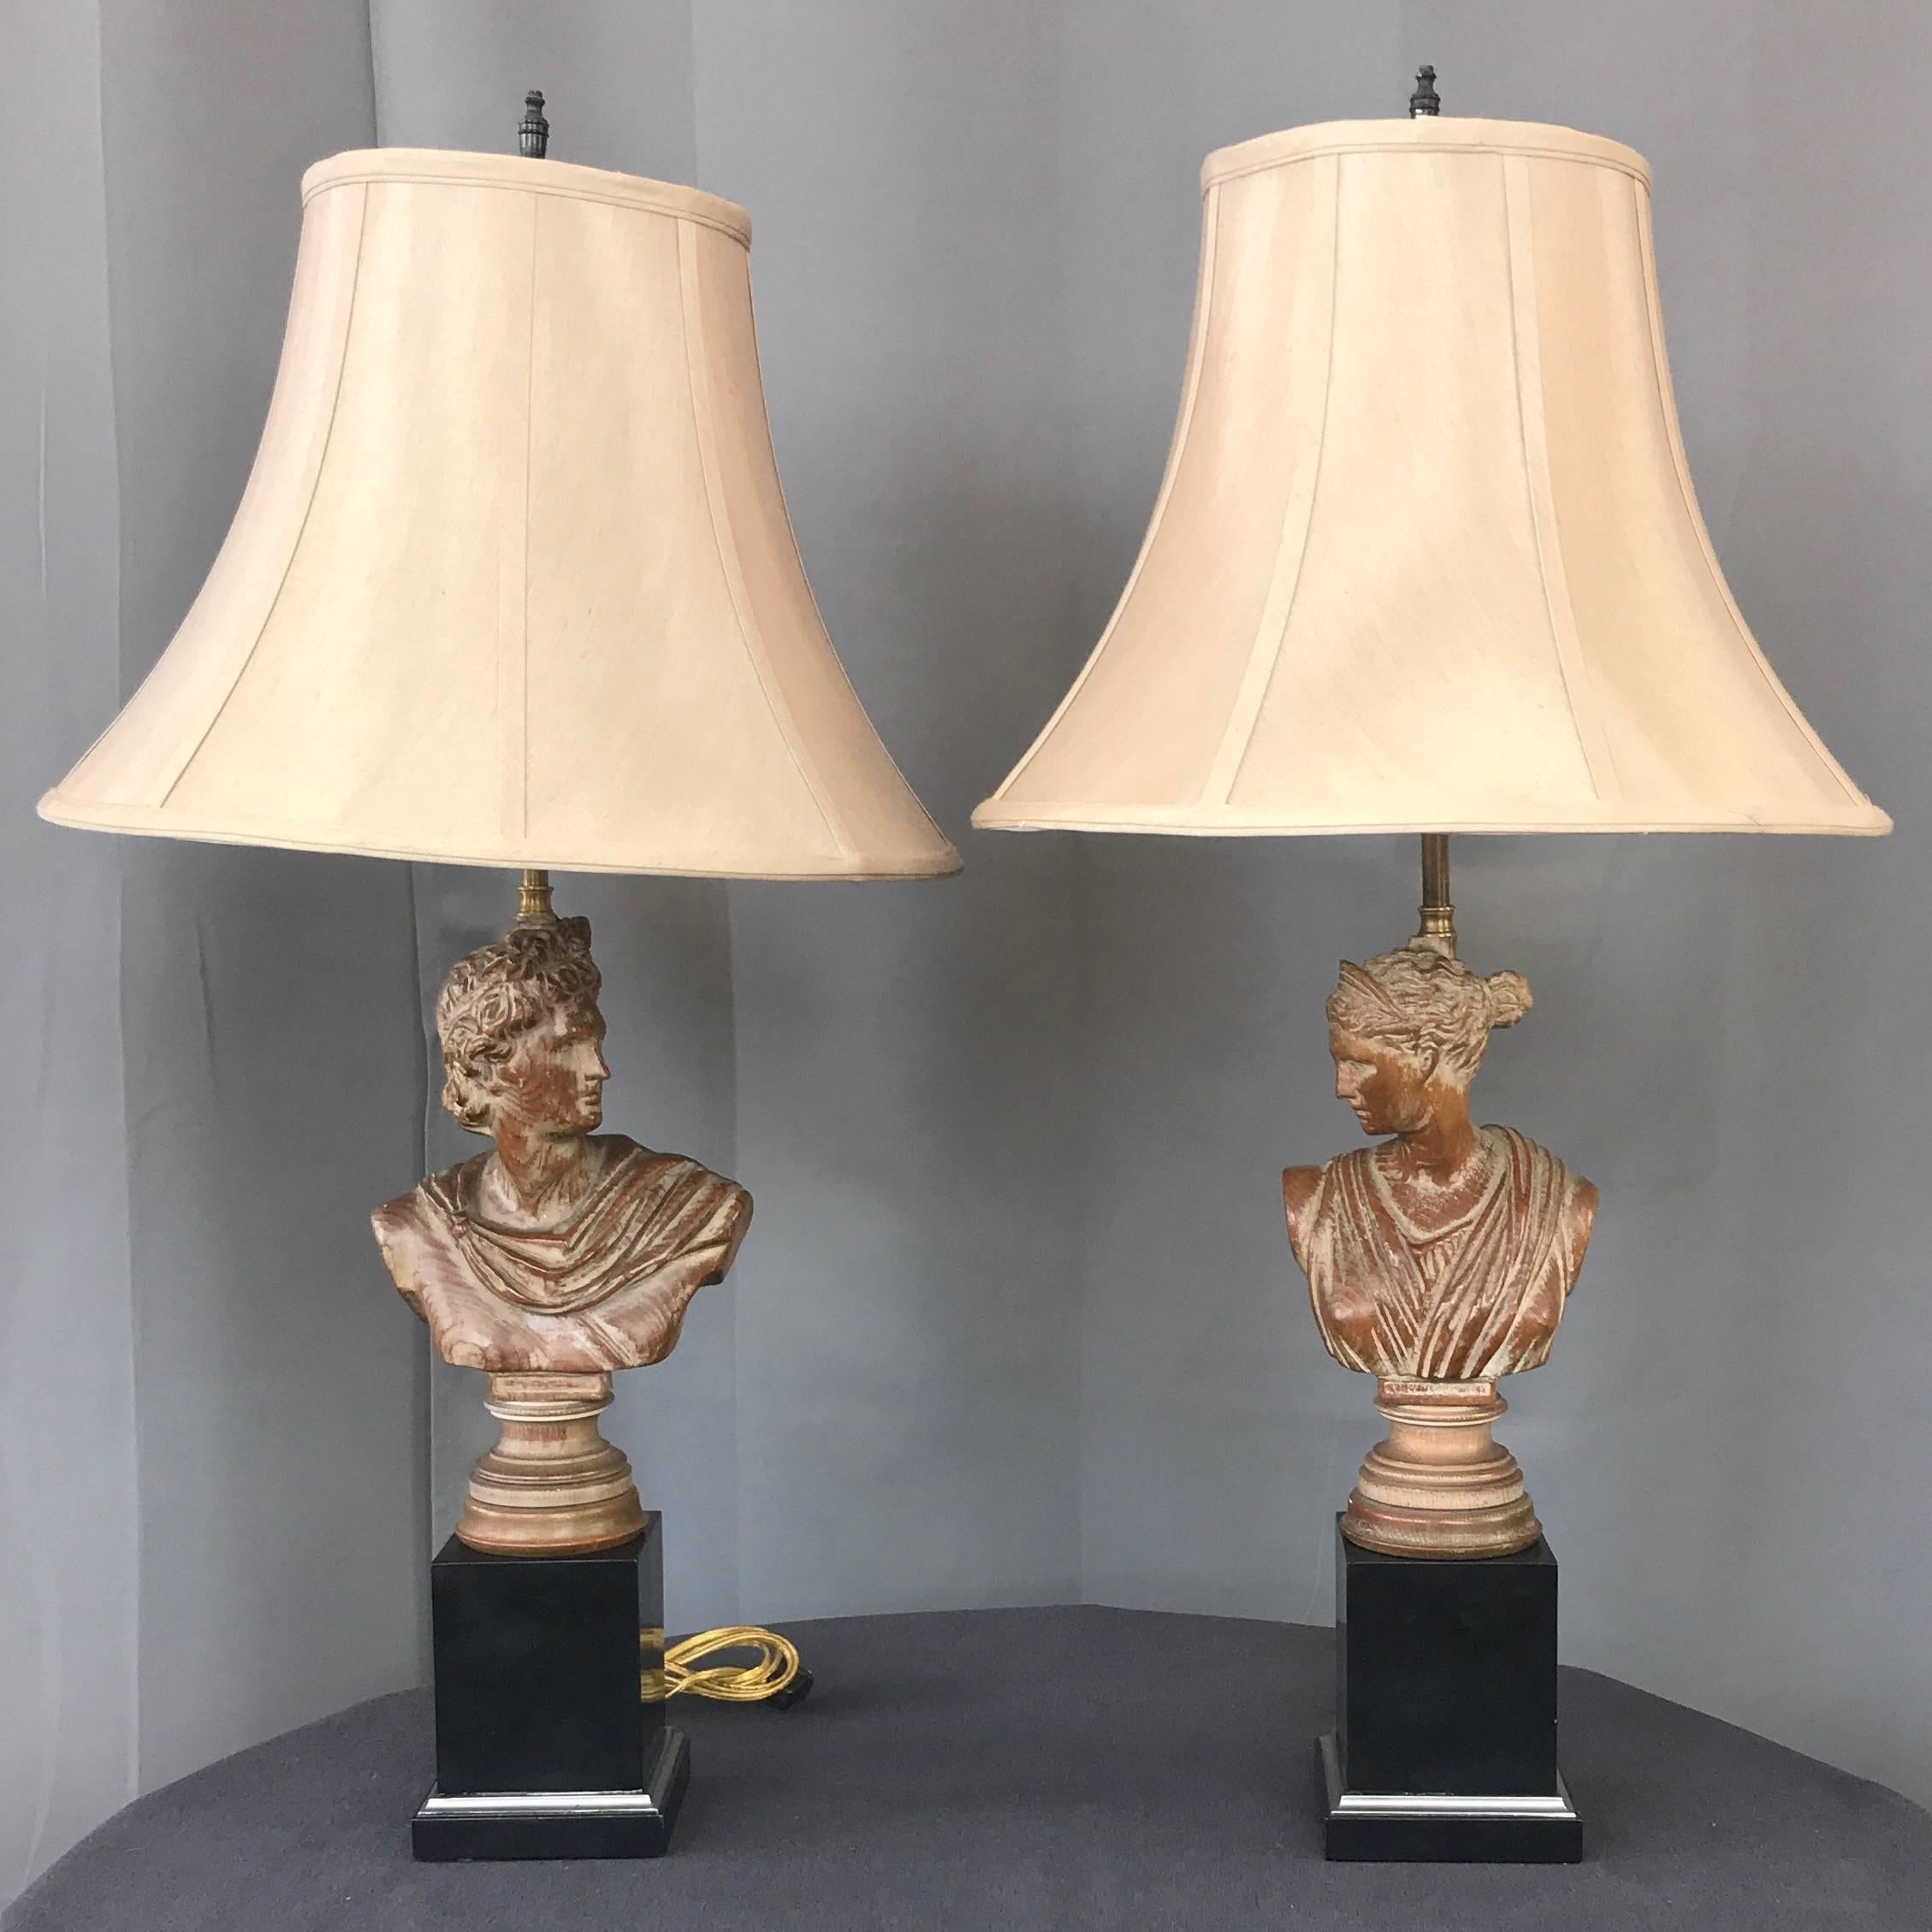 A pair of 1950s neoclassical roman bust “His & Her” hand-carved chestnut and lacquered wood table lamps.

Exquisitely carved solid chestnut busts depicting a stoic man and woman in Roman garb proudly posed atop turned bases. Judiciously applied